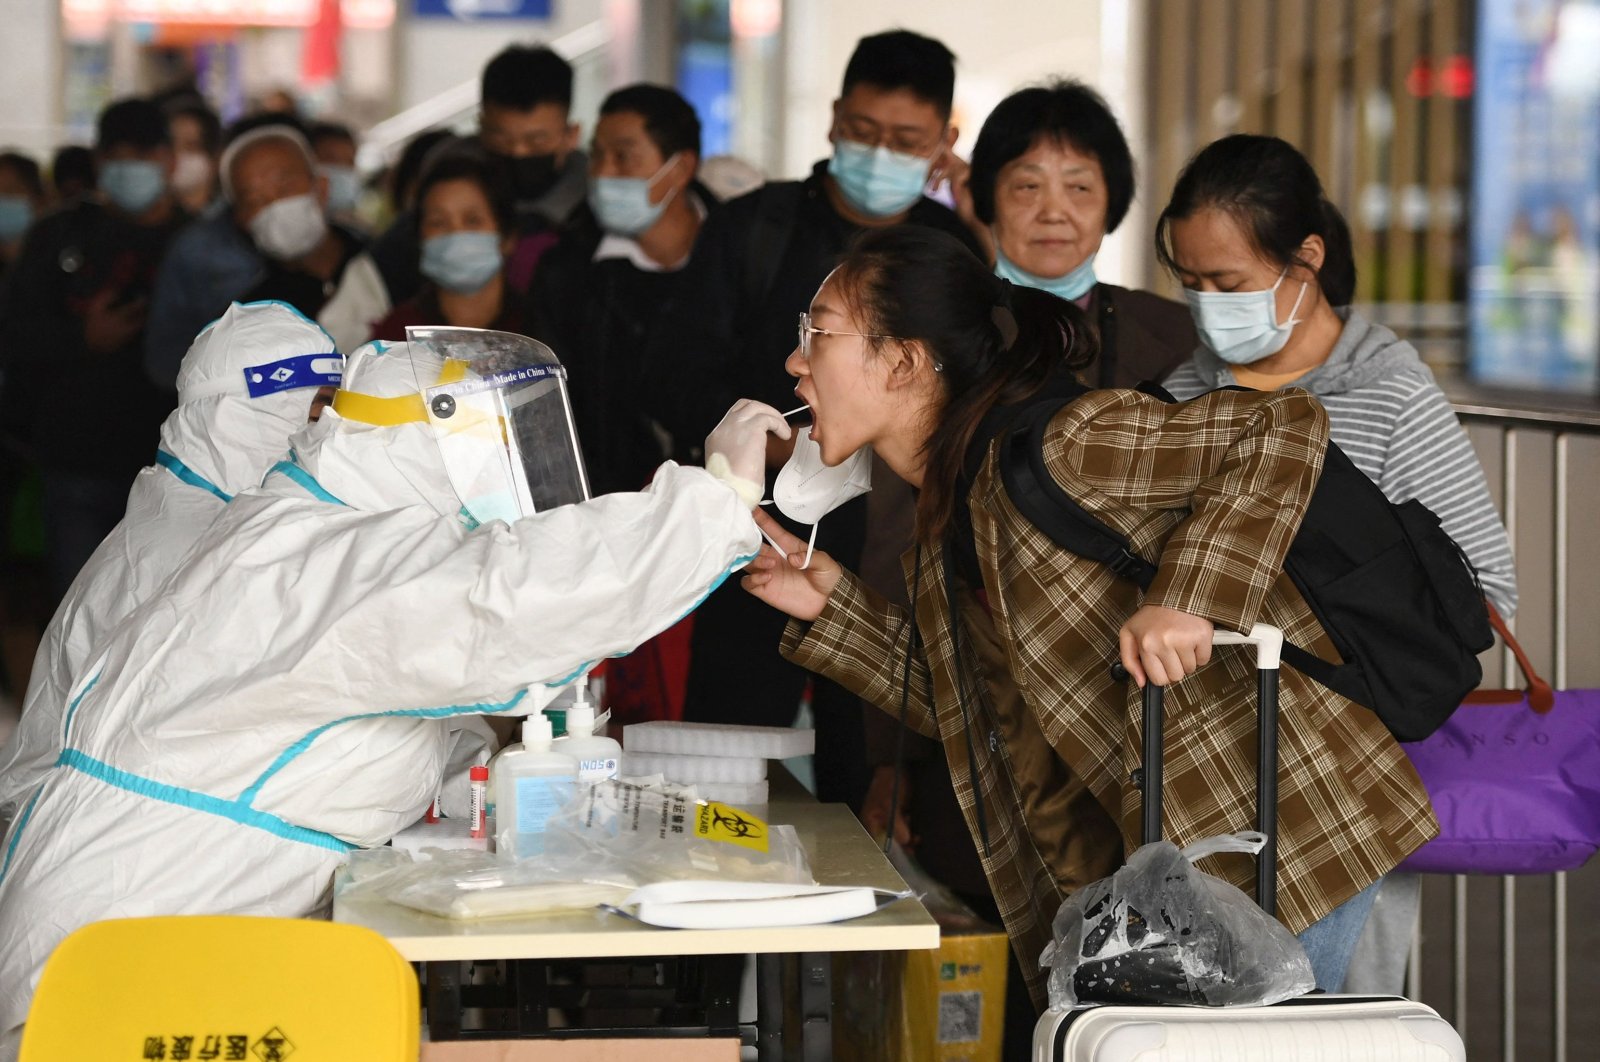 A passenger undergoes a nucleic acid test for COVID-19 as she arrives at the Nanjing Railway Station during National Day holidays in Nanjing, Jiangsu province, China, Oct. 6, 2022. (AFP Photo)